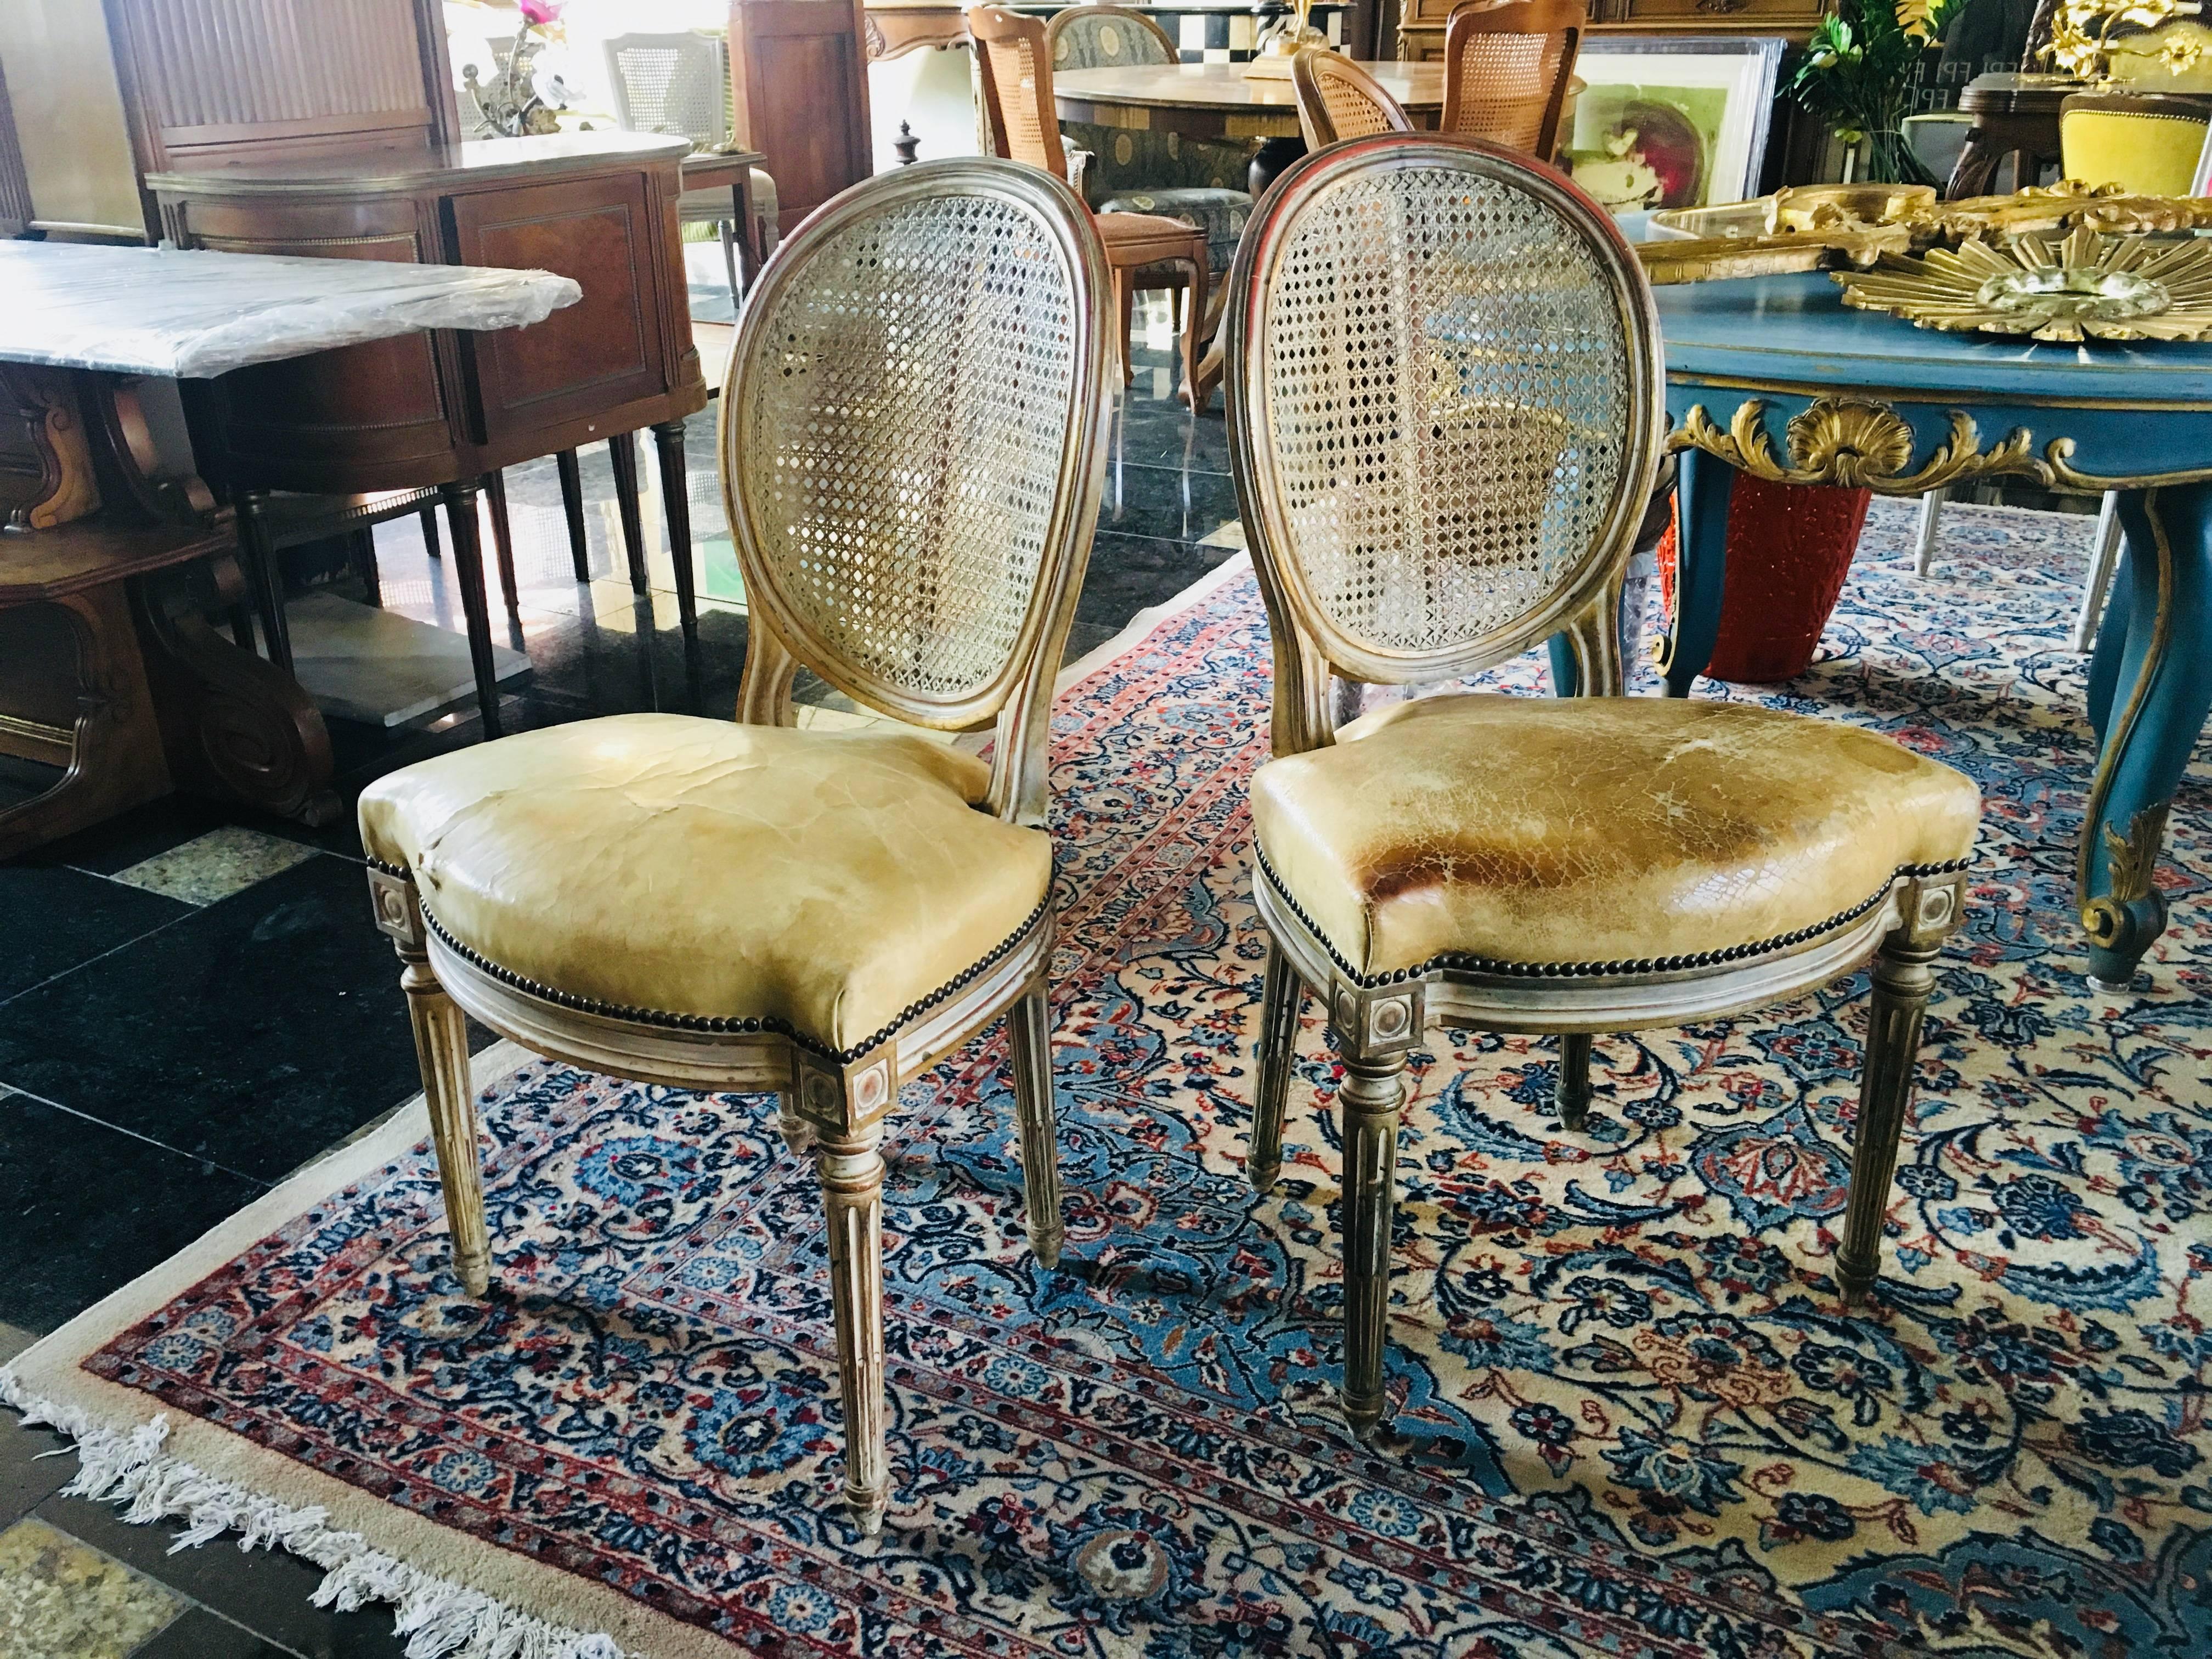 19th century pair of French side chairs with cane backs and original leather seats made of hand-painted wood.
France, circa 1860.